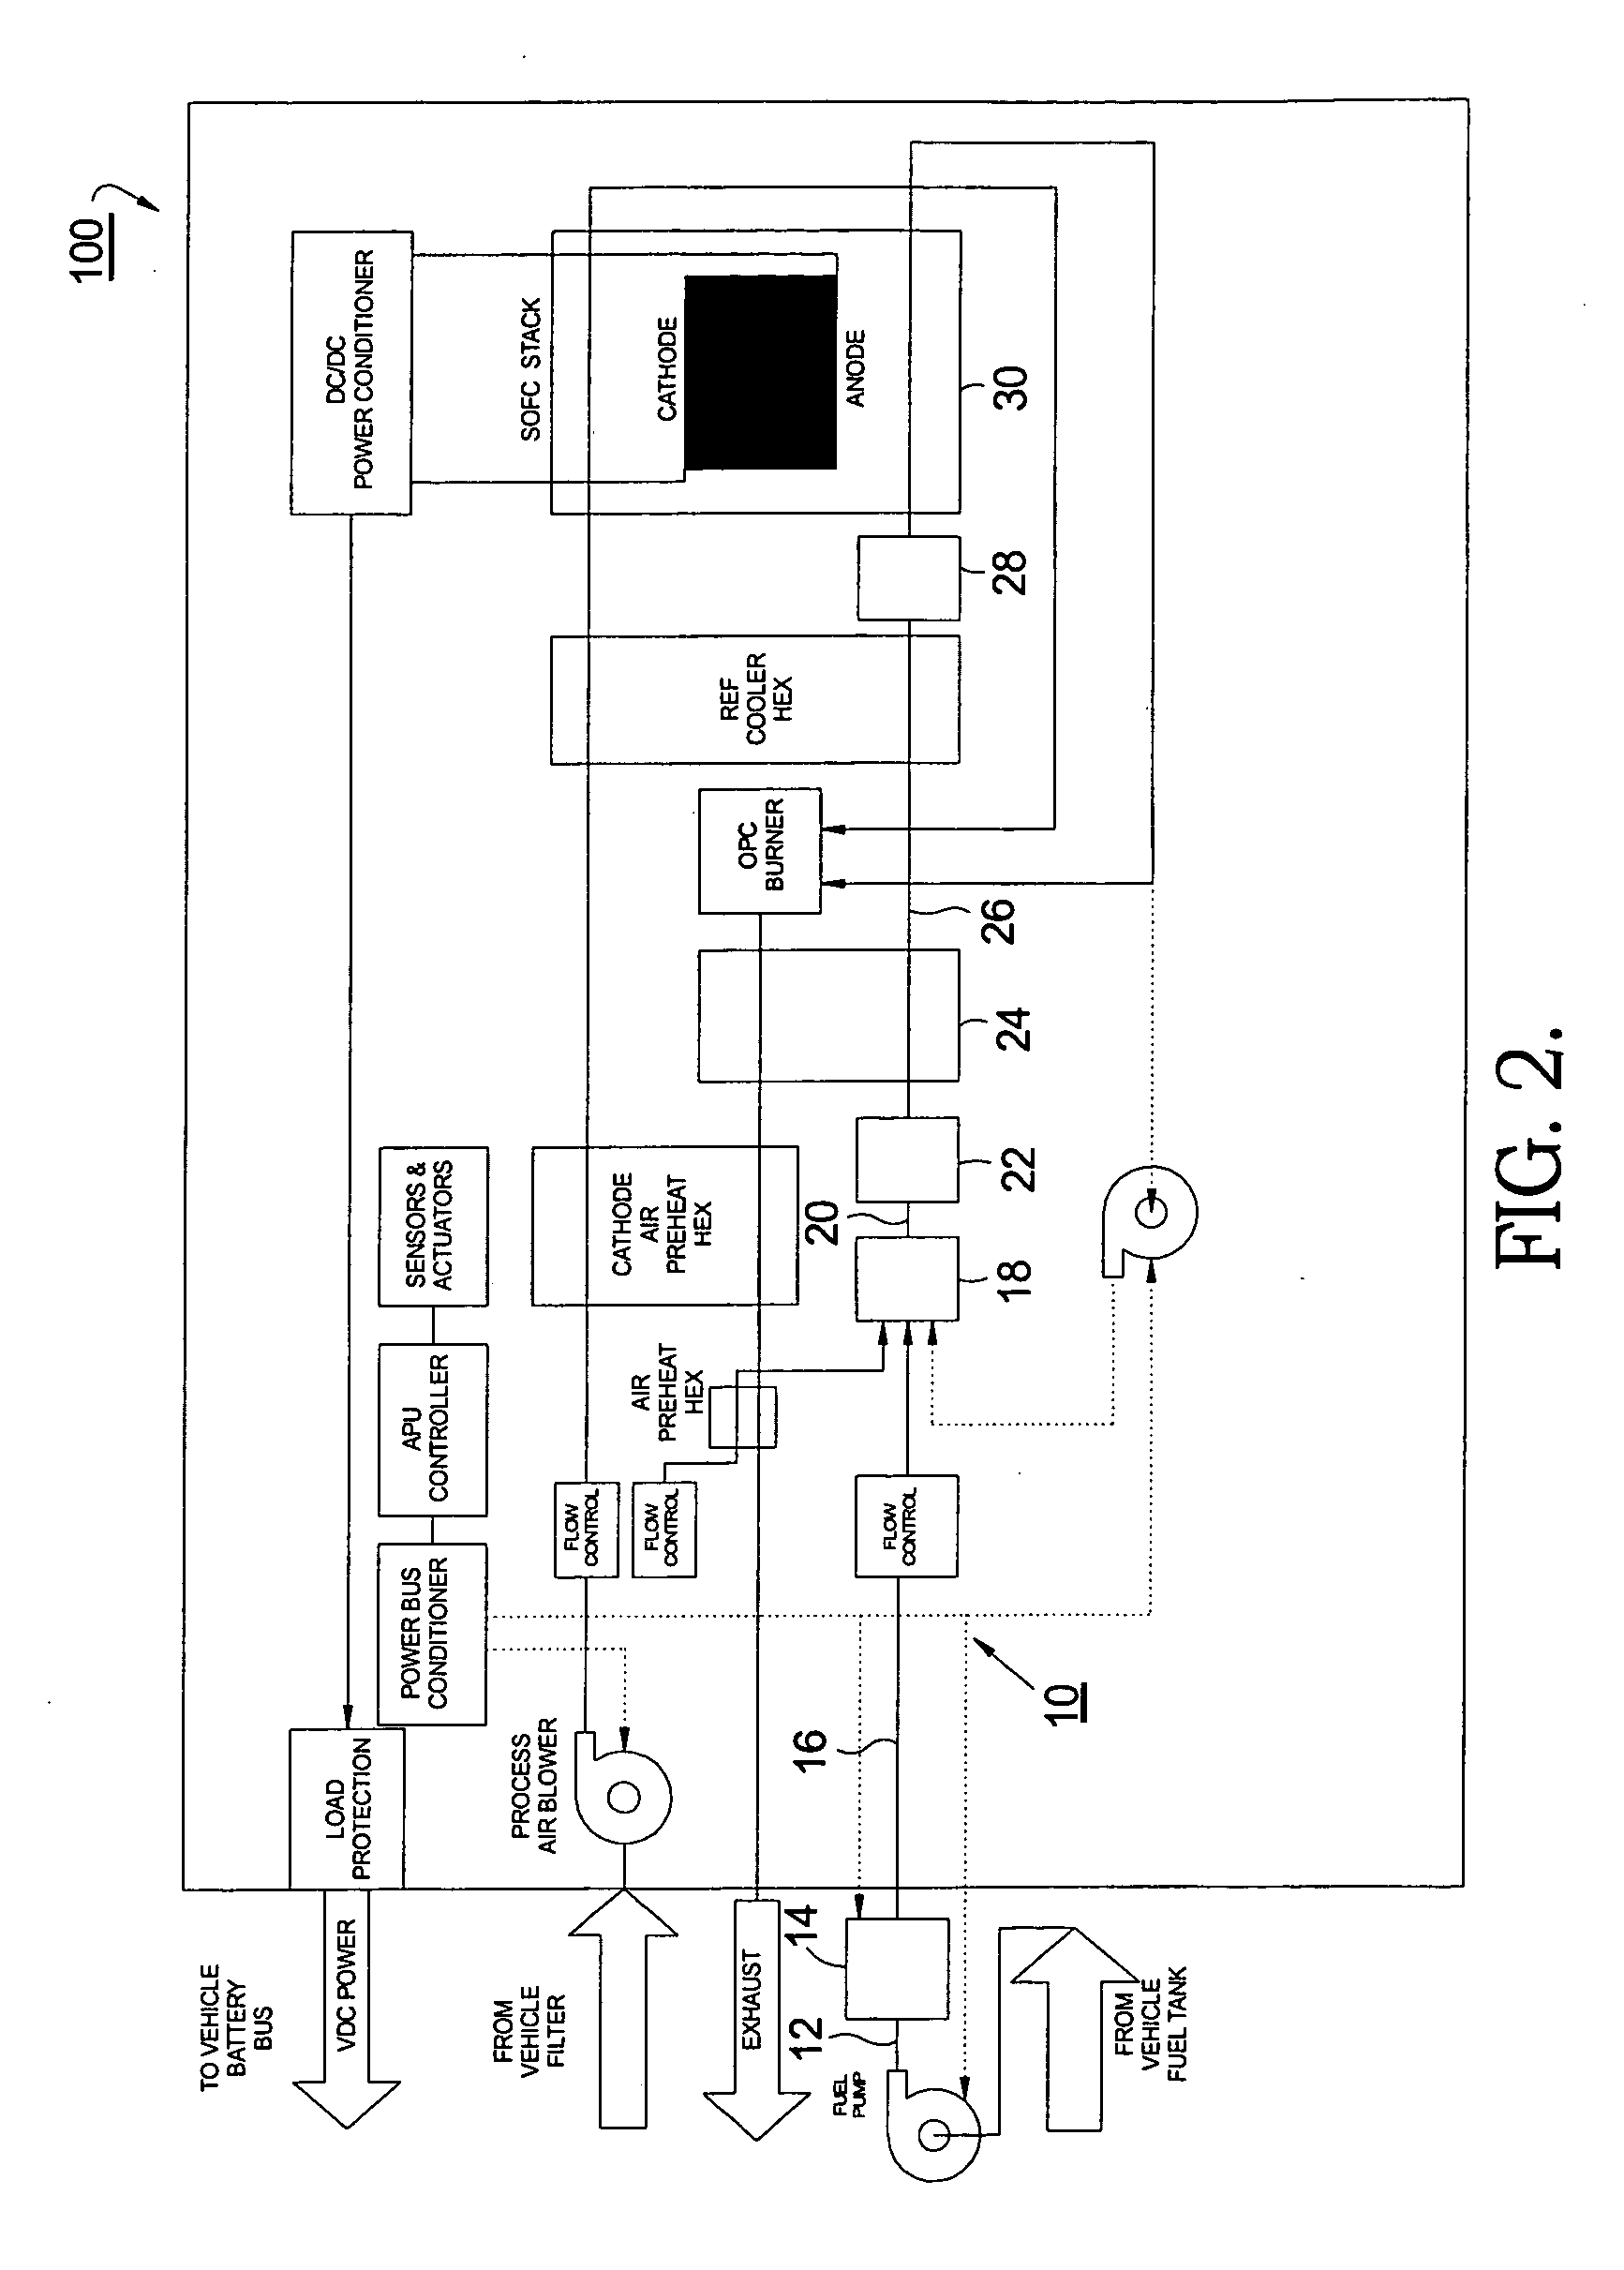 Method and apparatus for desulfurization of fuels